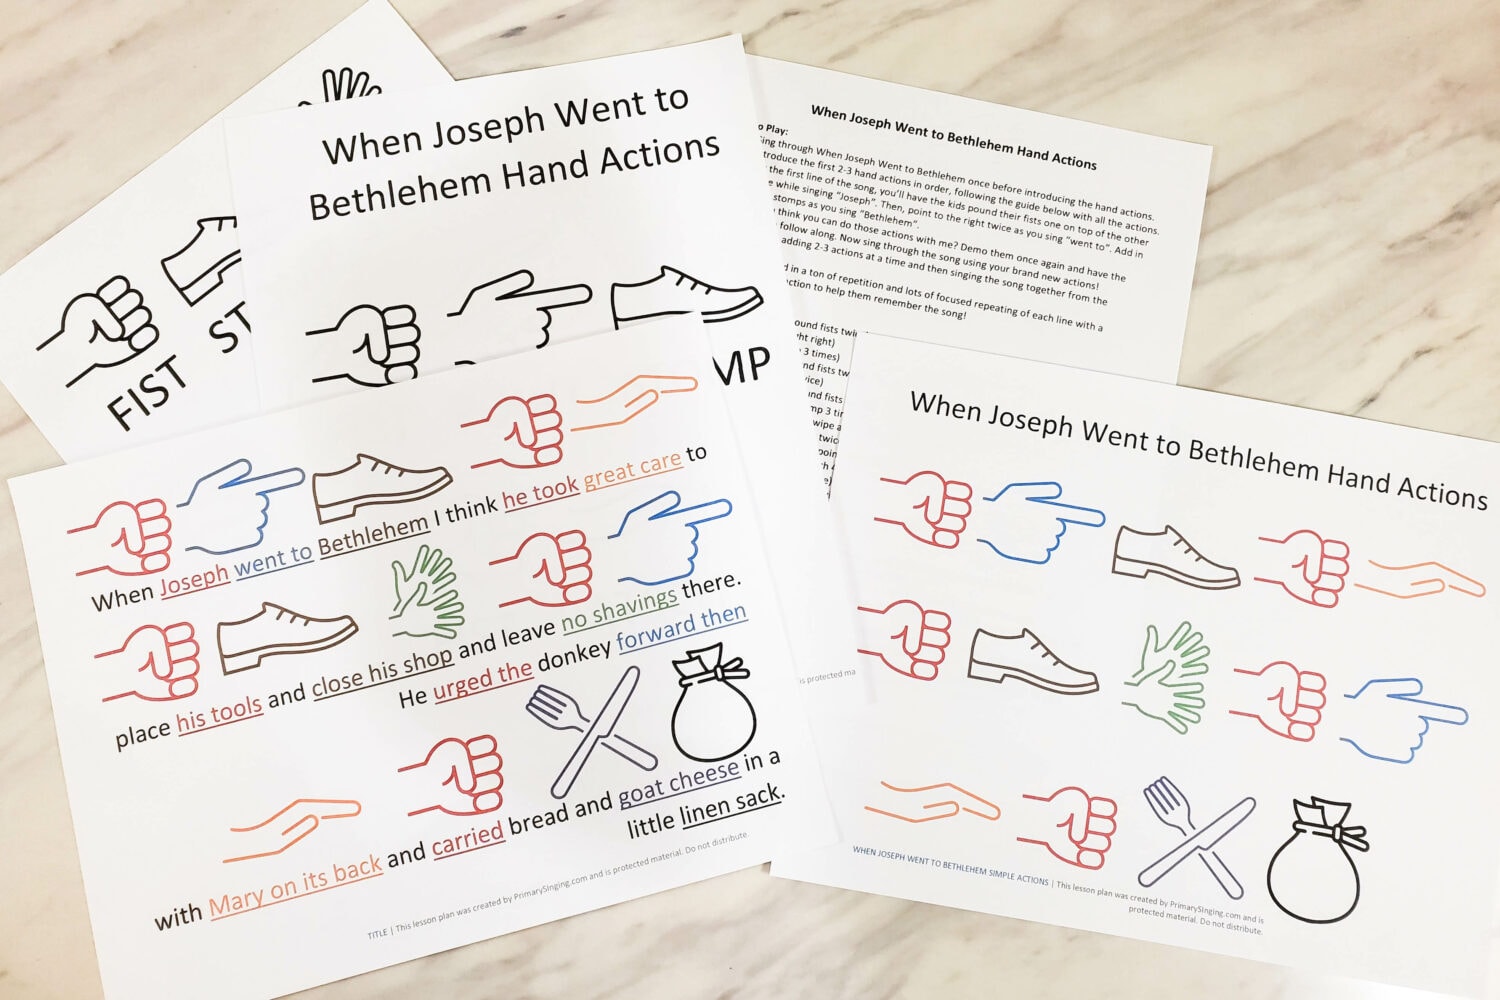 When Joseph Went to Bethlehem Simple Actions fun singing time idea - Use a series of actions and movements to go with the lyrics in this fun movement activity for LDS Primary music leaders teaching this song this christmas!